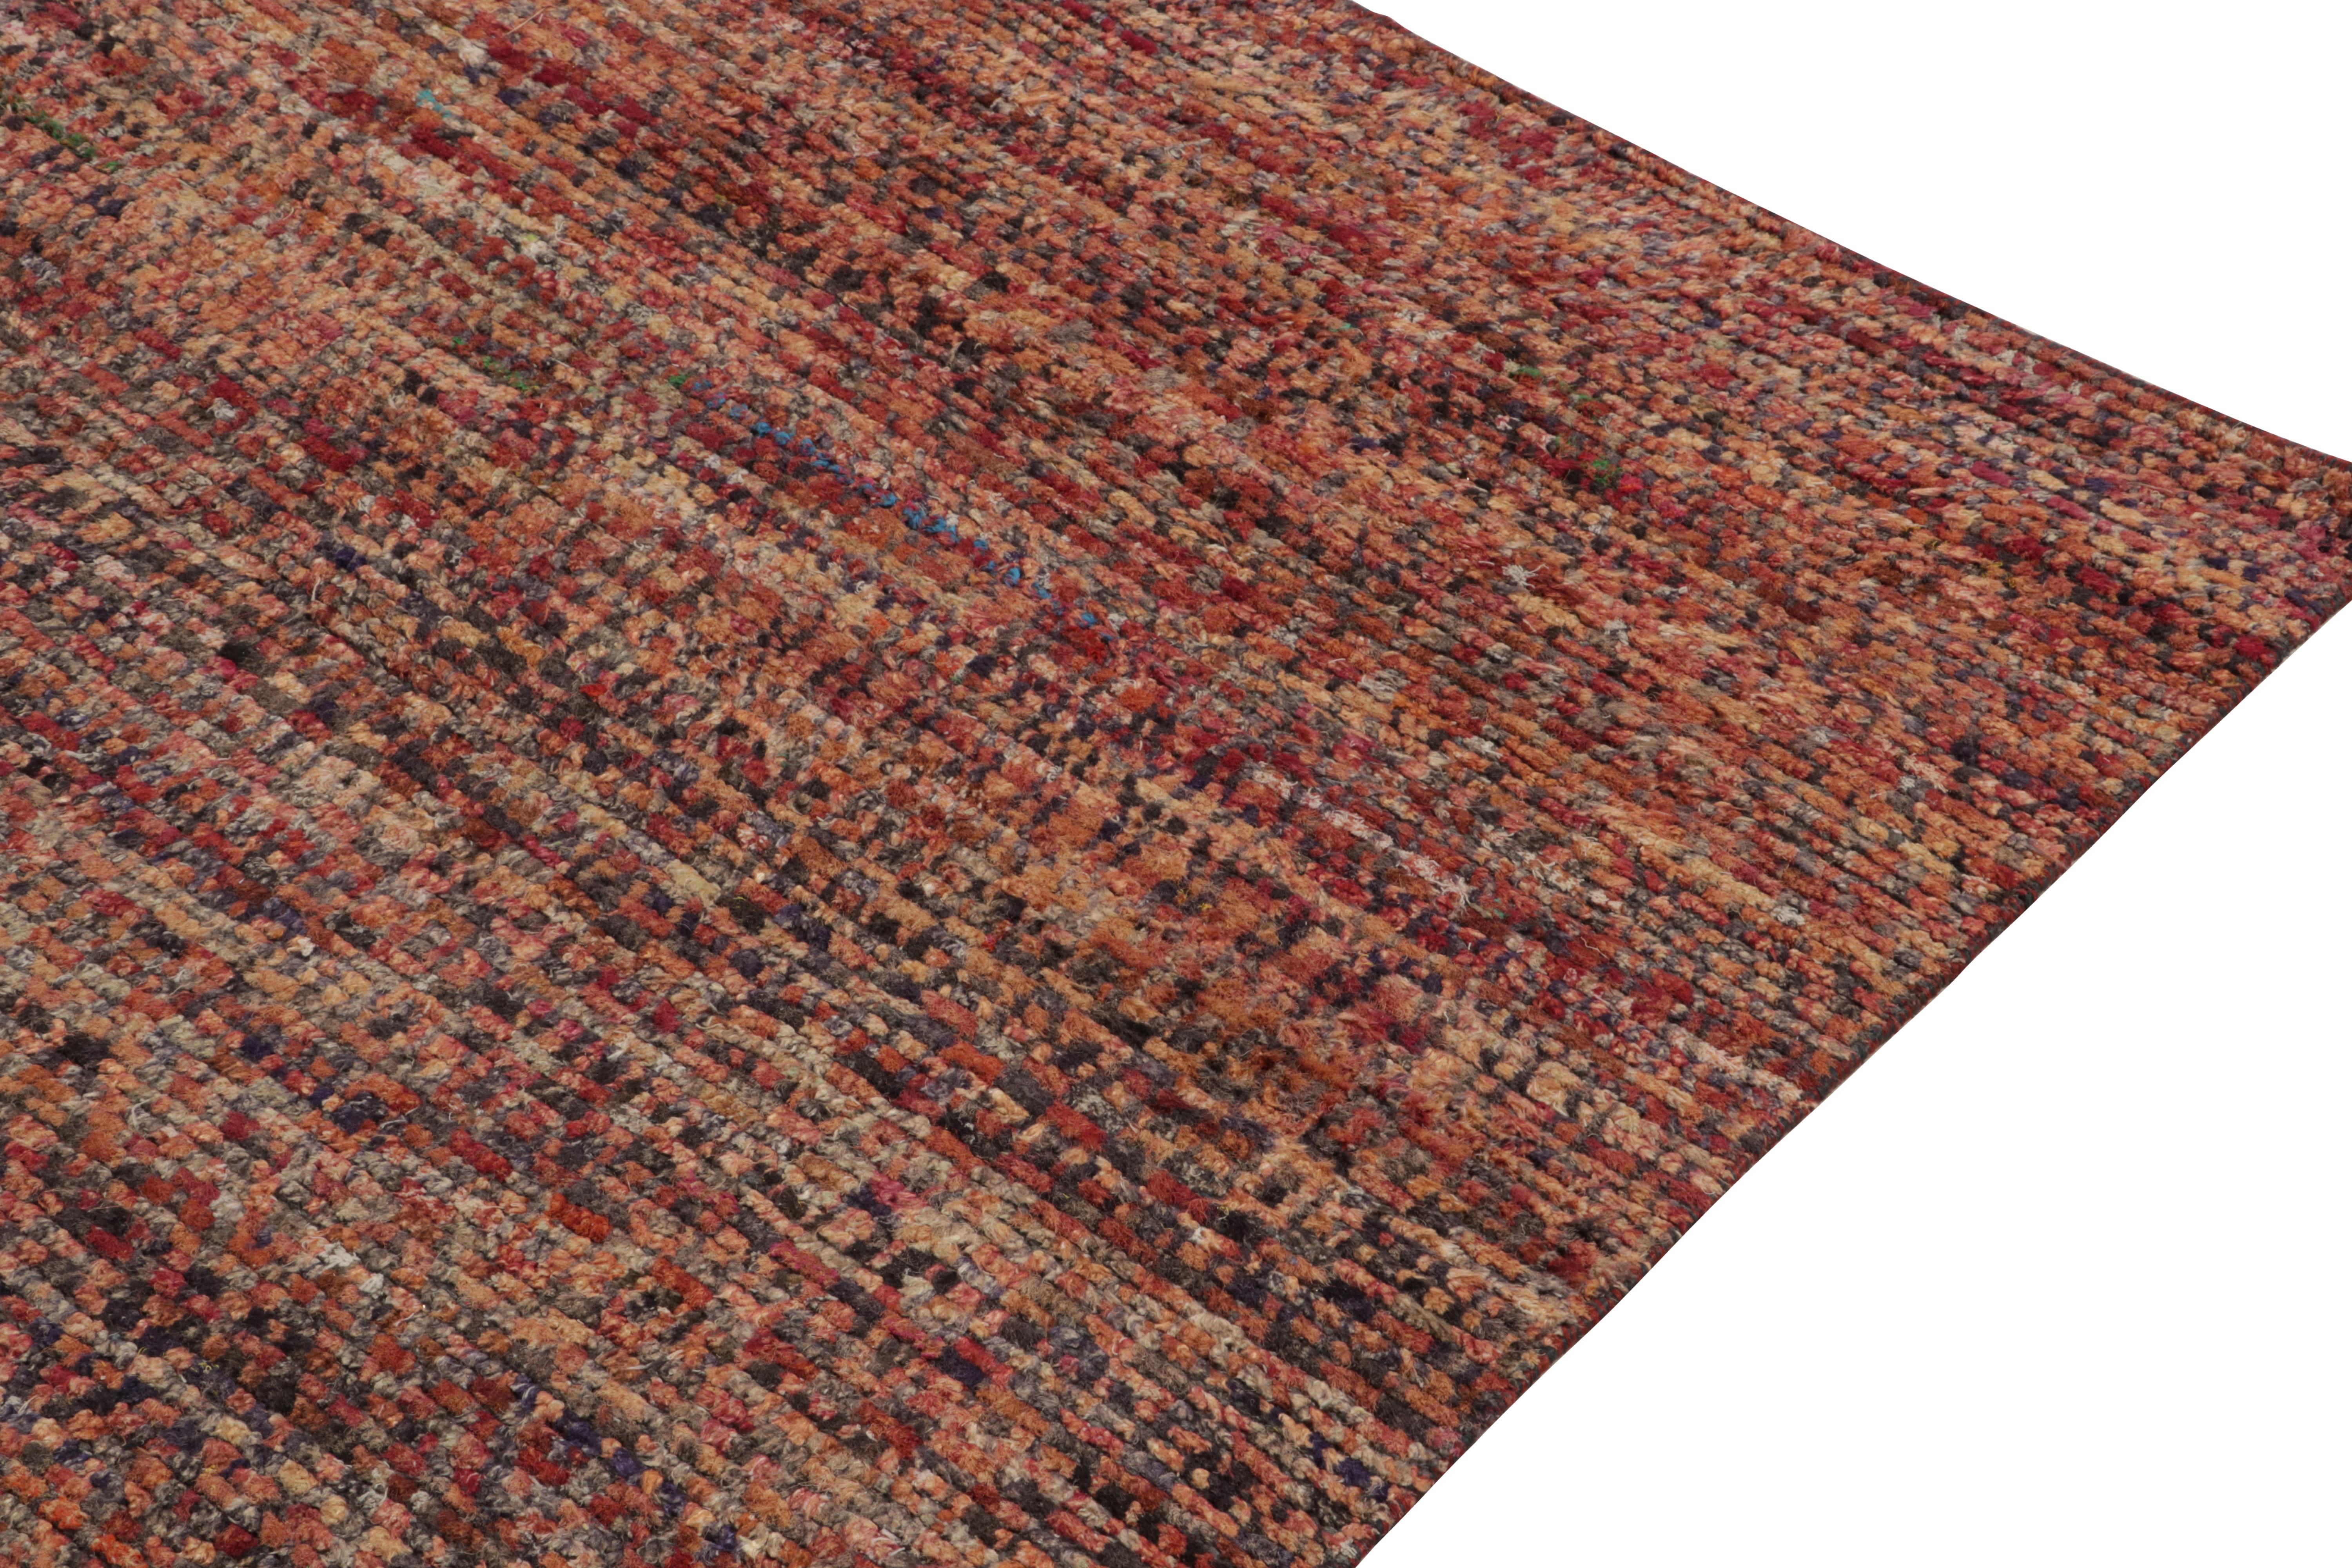 Contemporary Rug & Kilim’s Modern Rug in a Red & Orange-Brown Striae, Geometric Patterns For Sale